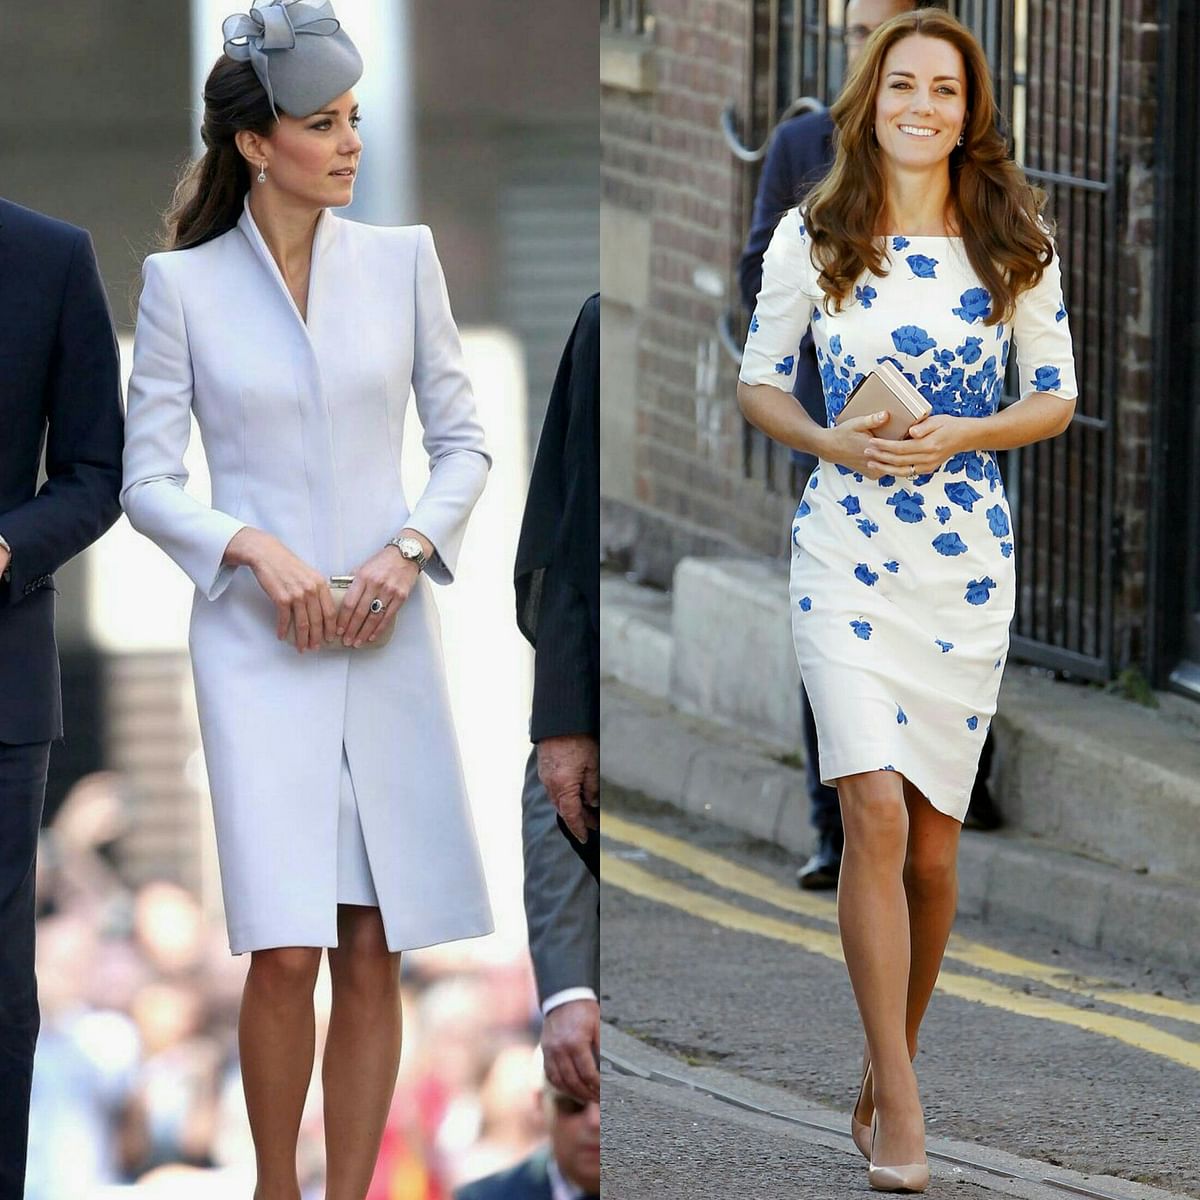 On Kate Middleton’s birthday, here’s a recap of her best recycled looks.